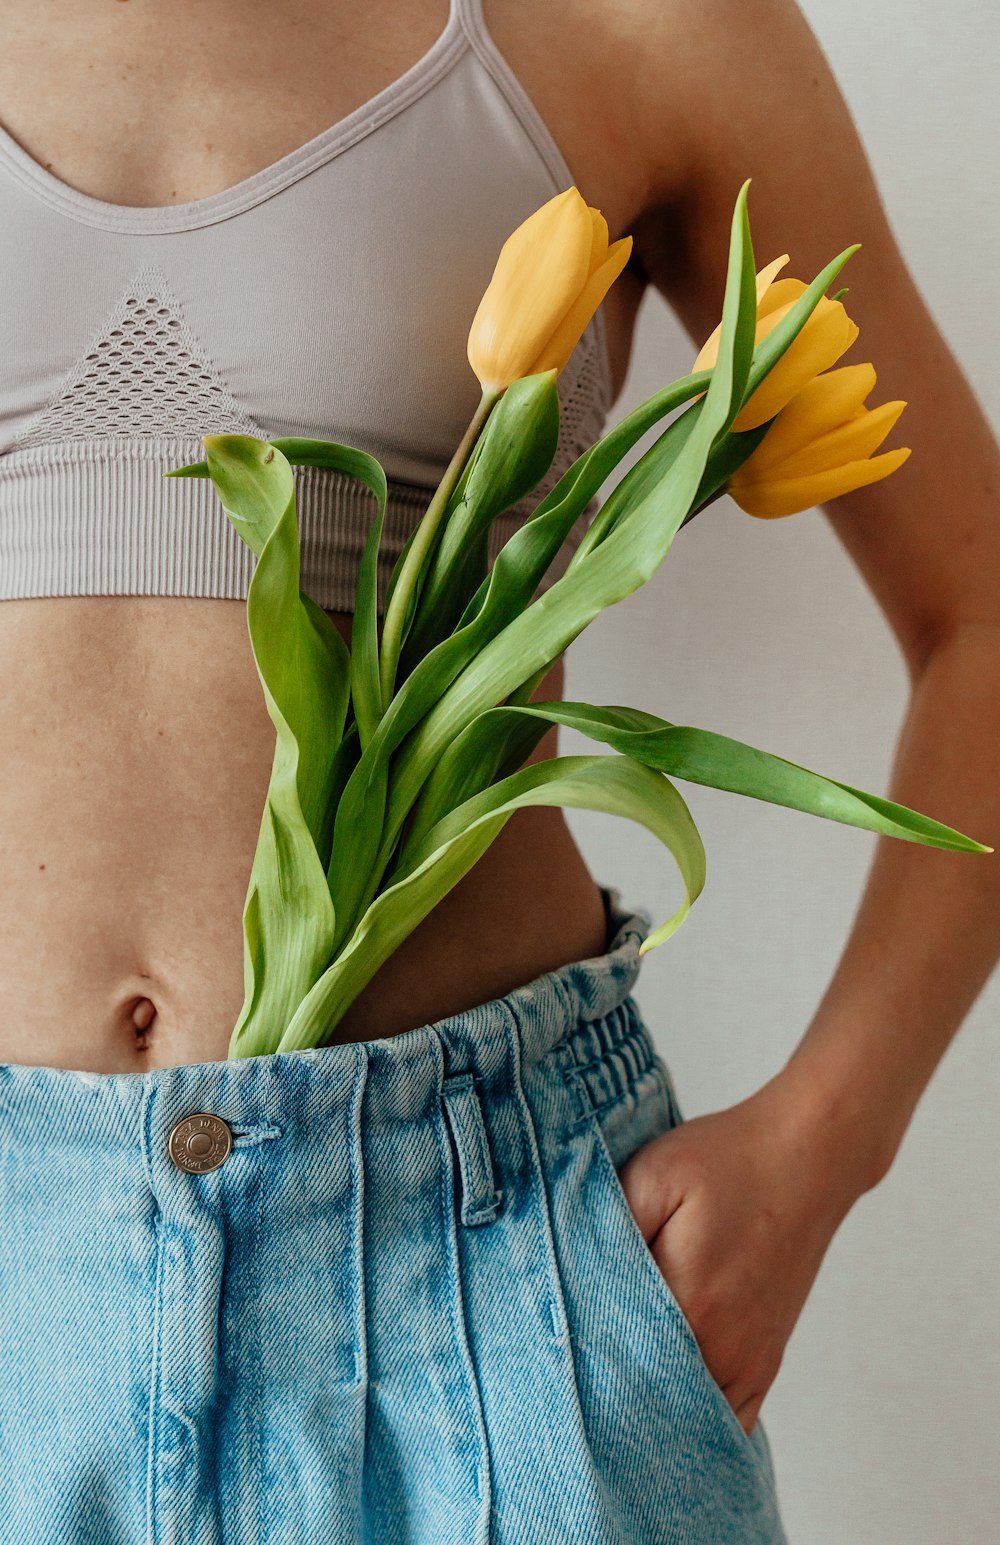 woman in blue denim shorts holding yellow flower